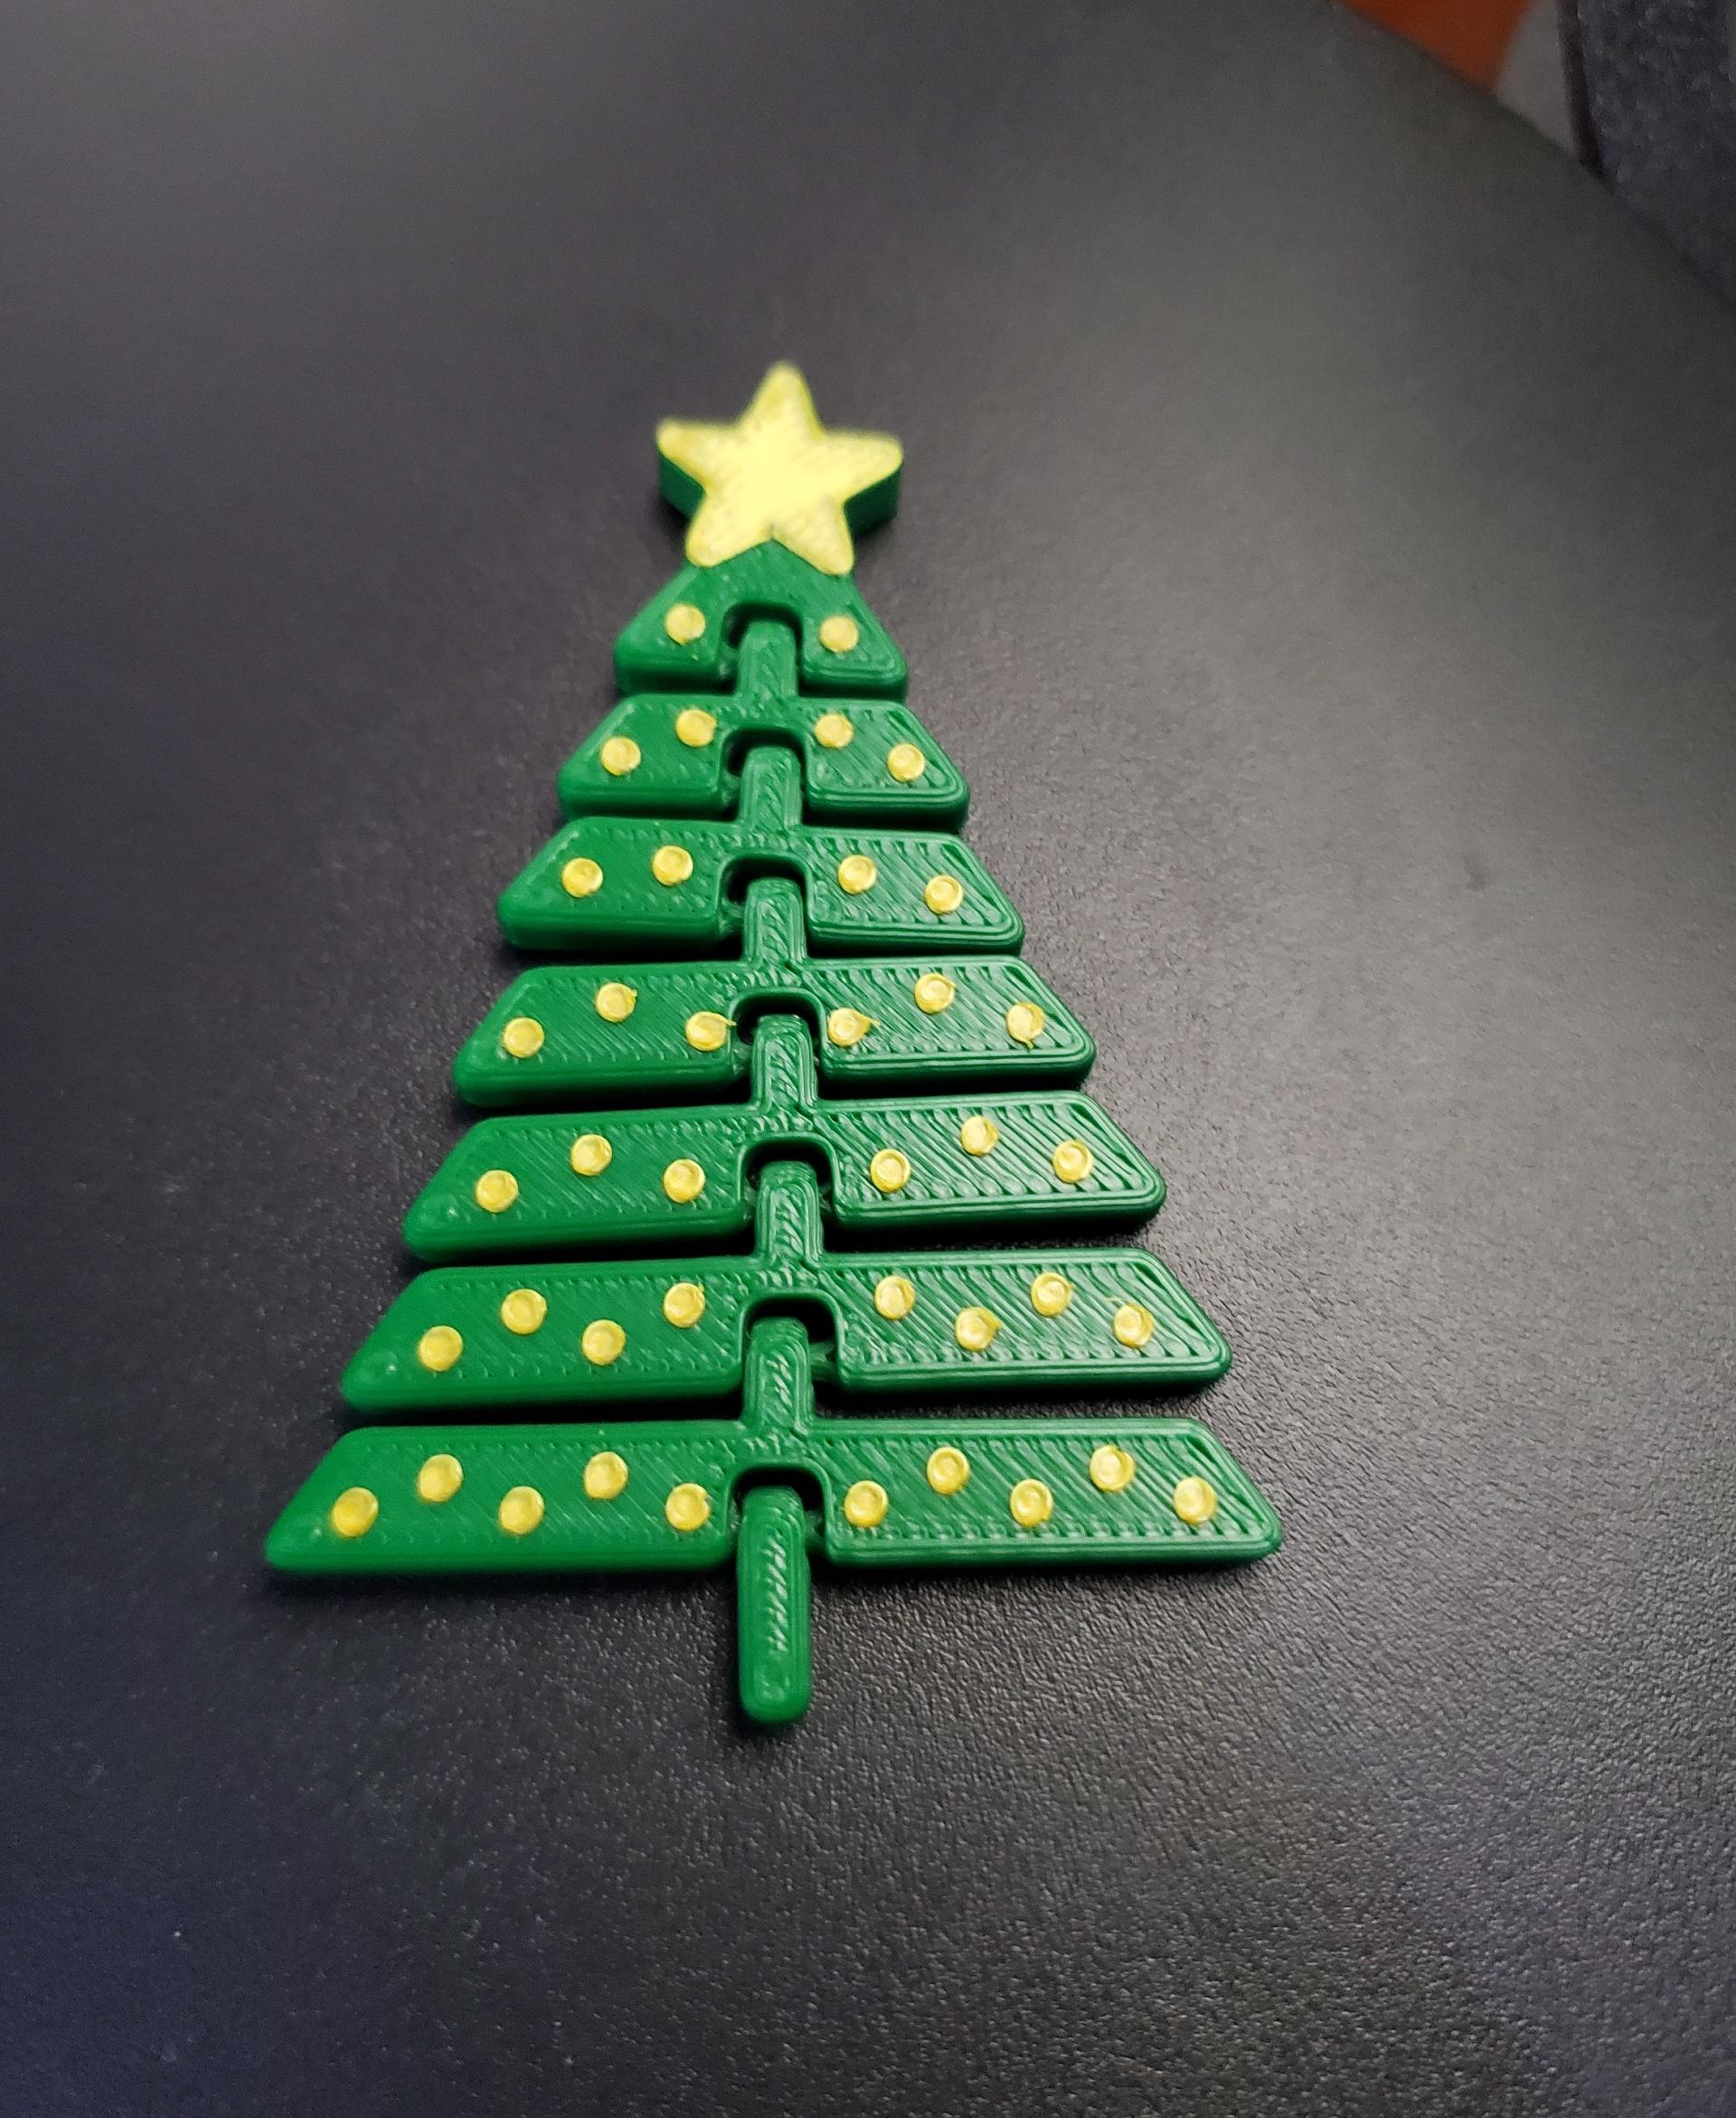 Articulated Christmas Tree with Star and Ornaments - Print in place fidget toys - 3mf - sliceworx forest green - 3d model